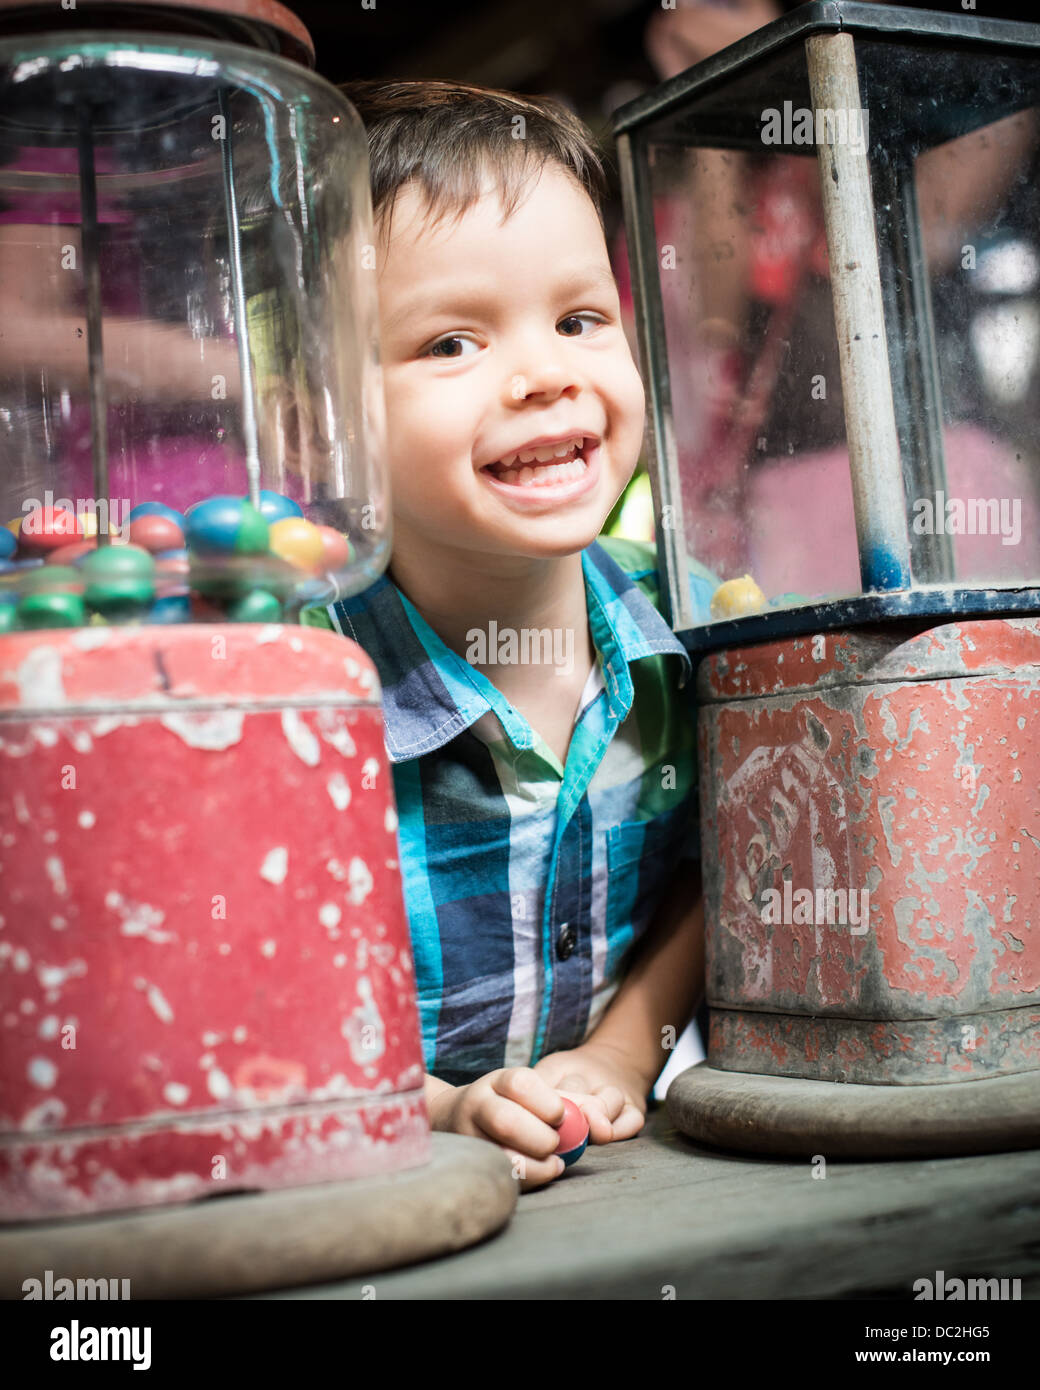 Series of photos of a 2 year old mixed race Asian Caucasian child enthusiastically getting a toy from a vintage vending machine Stock Photo